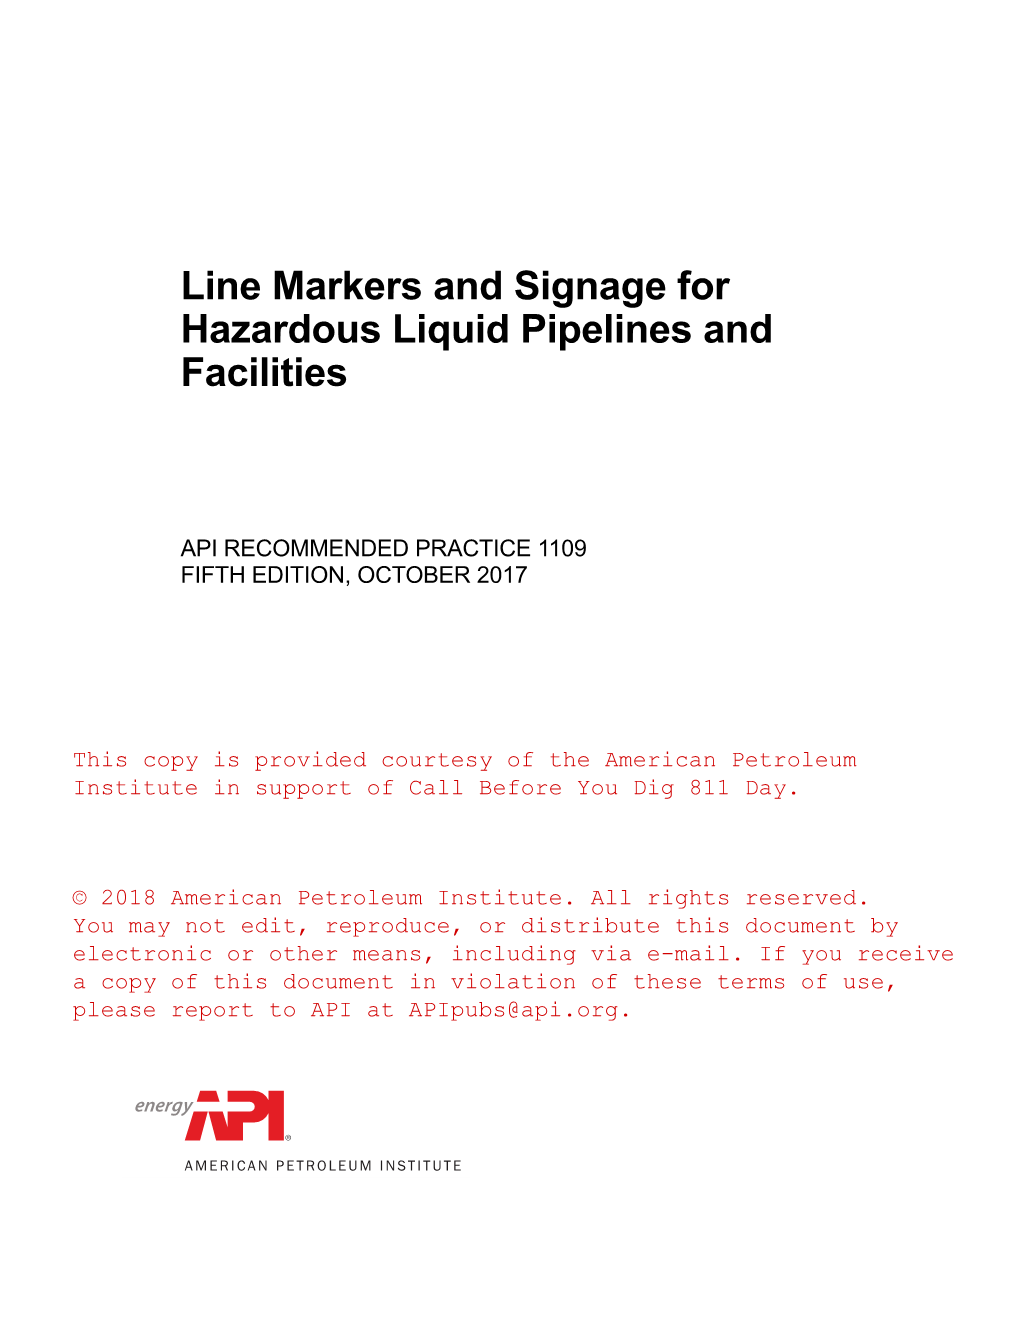 Line Markers and Signage for Hazardous Liquid Pipelines and Facilities